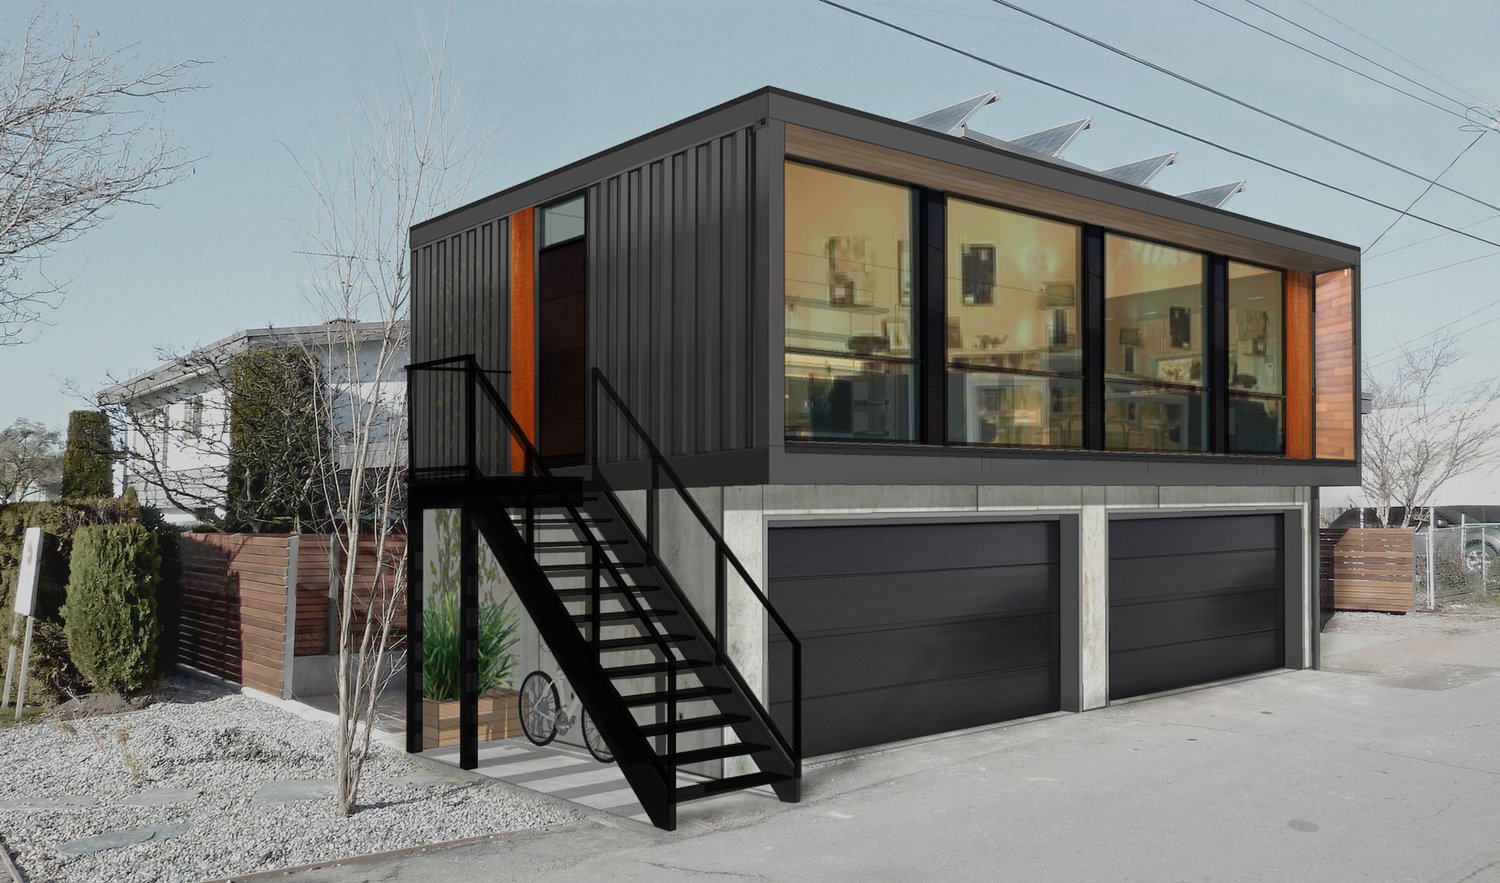 You can order HonoMobo’s prefab shipping container homes online